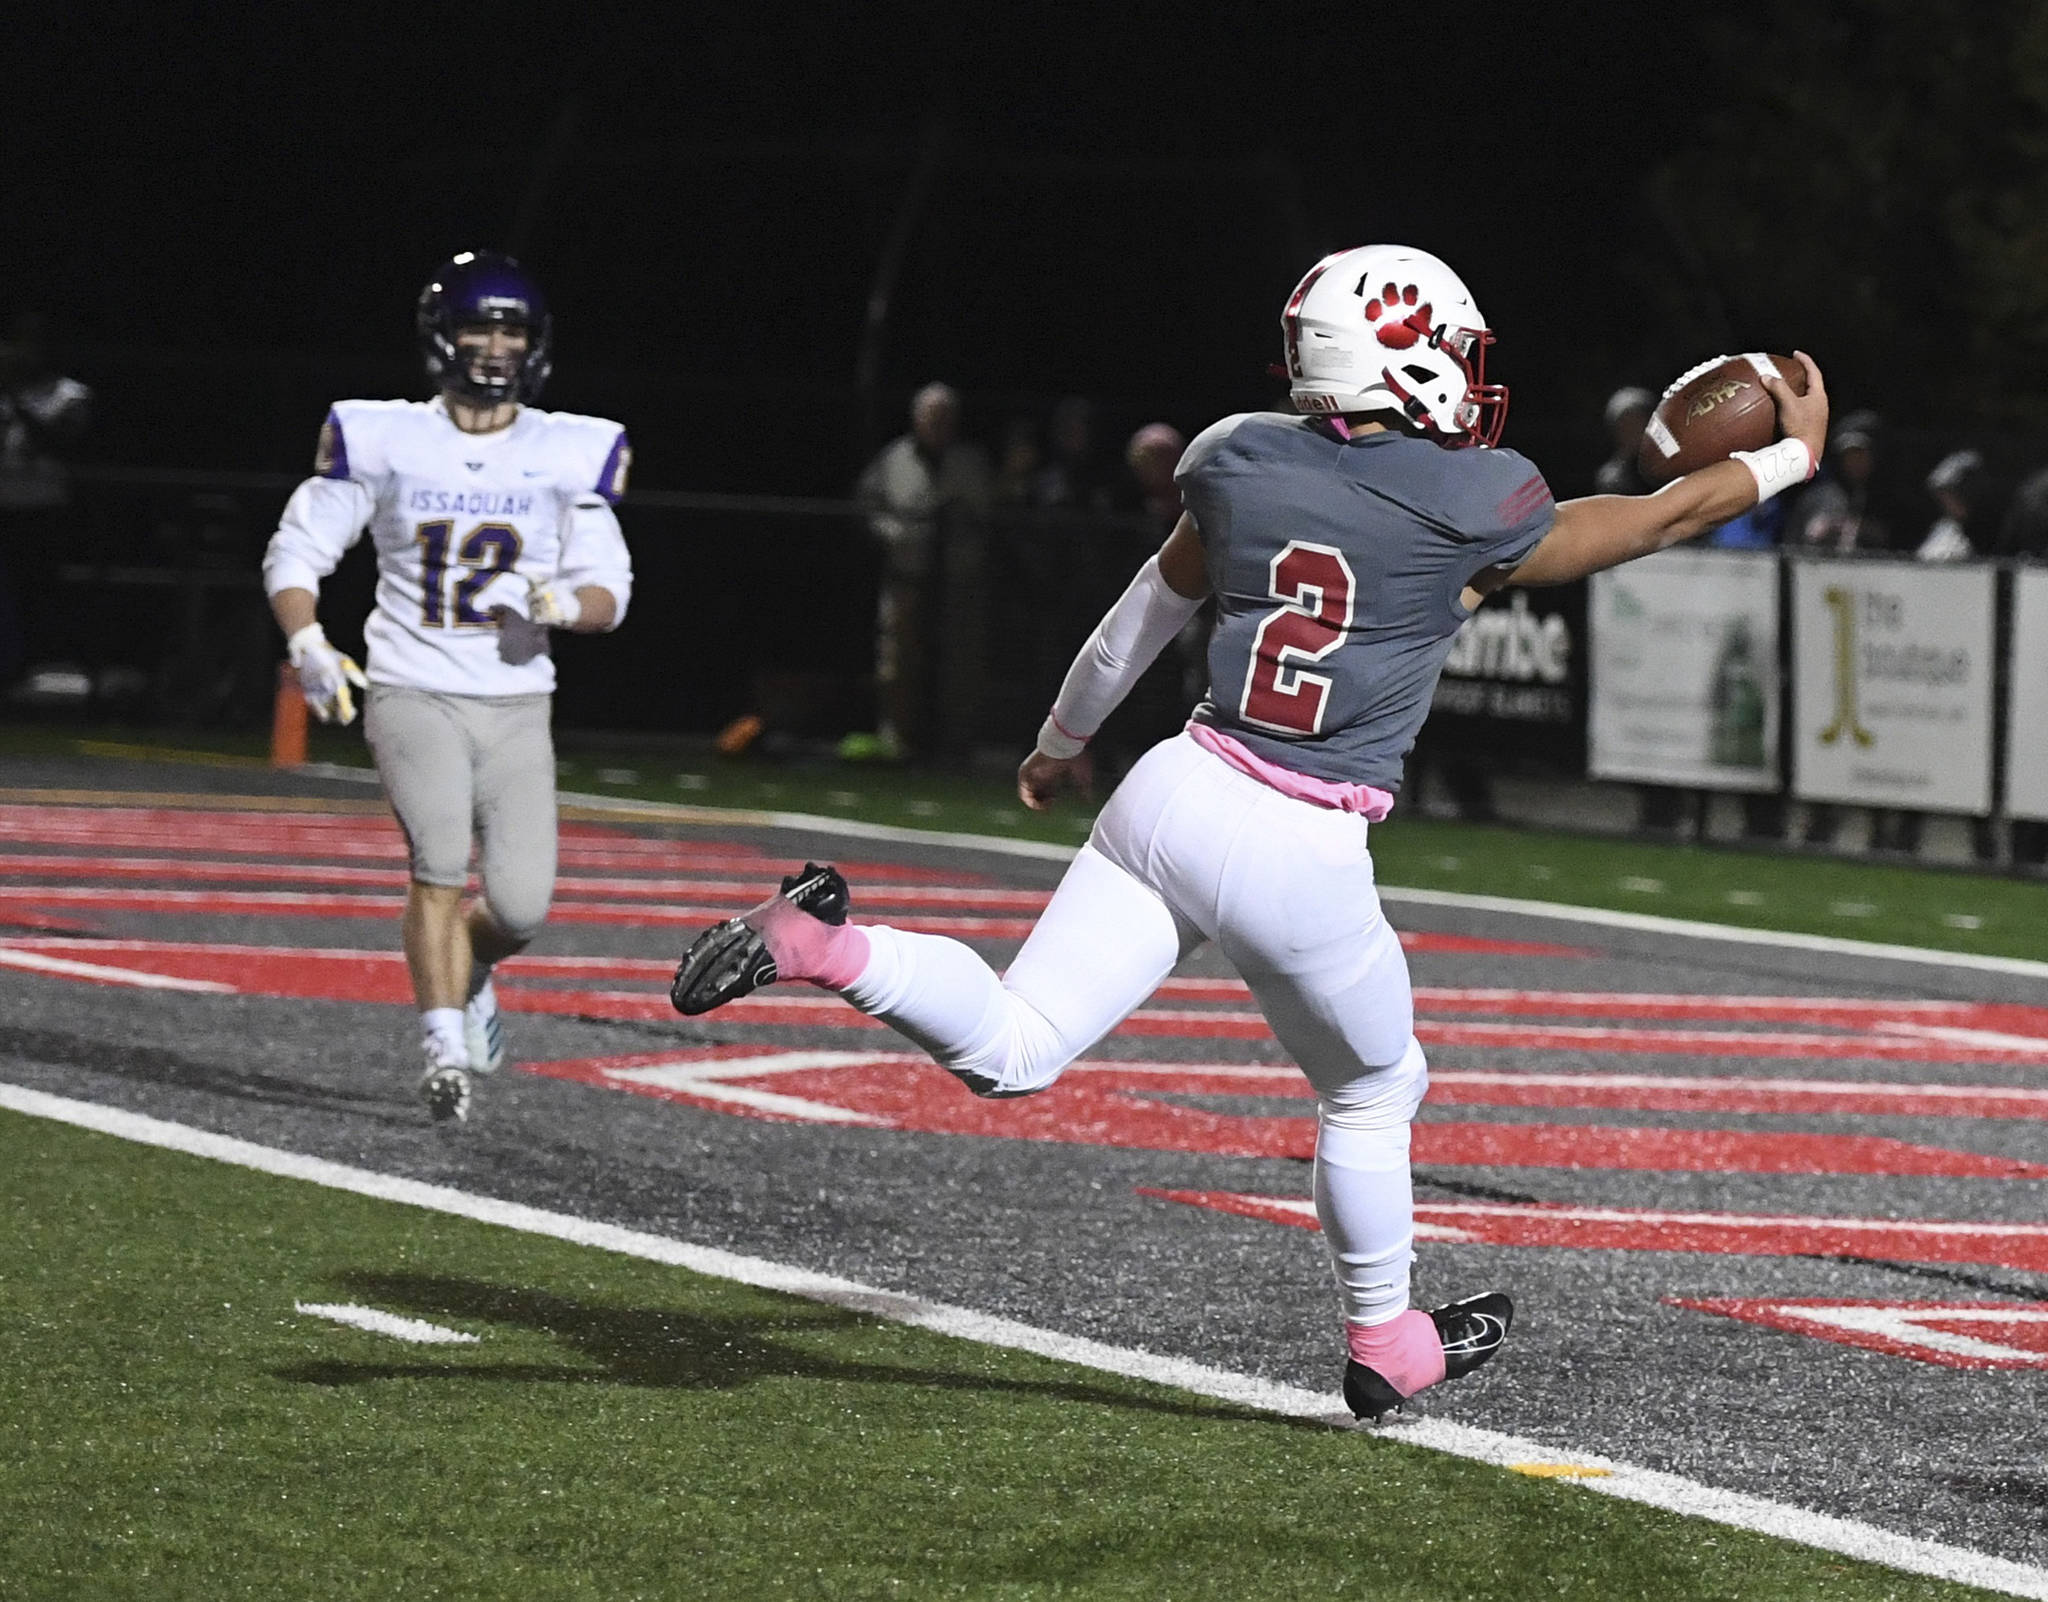 Mount Si wide receiver Cole Norah runs into the end zone after a 13-yard touchdown catch in the third quarter of the Wildcats 34-0 victory over Issaquah on Oct. 11. Photo courtesy of Calder Productions